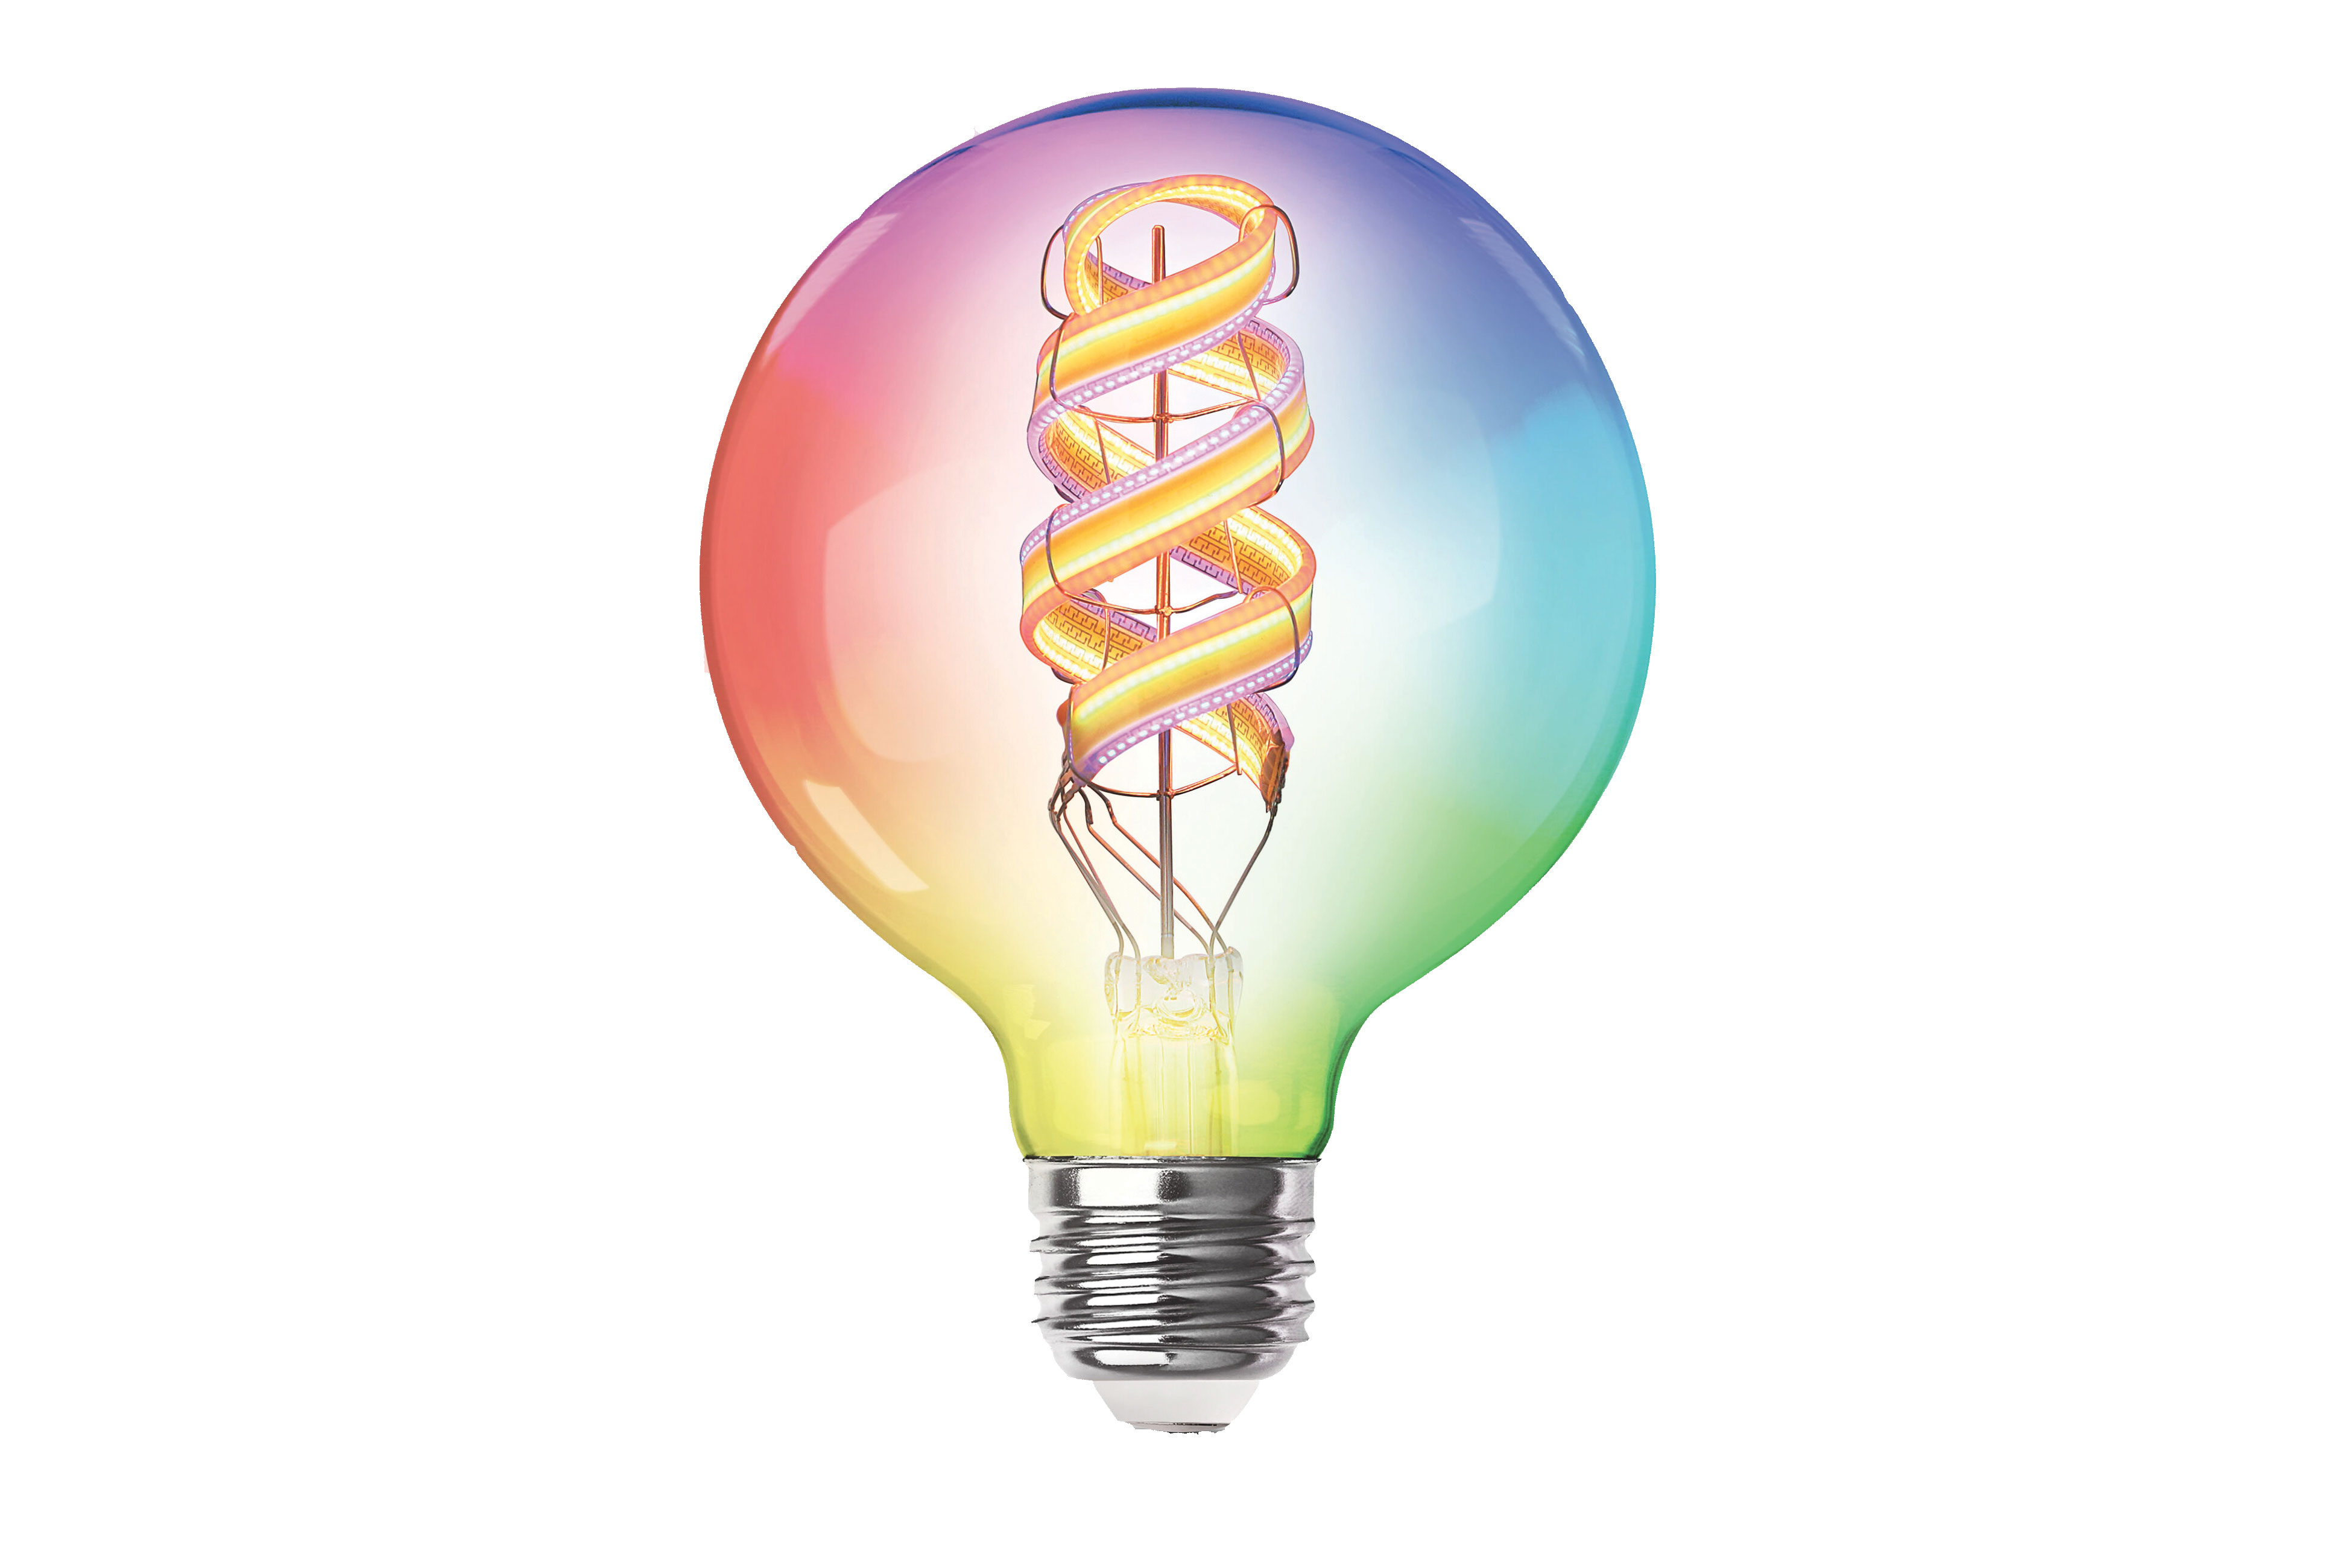 Multicolored lightbulb with a purple and yellow helix filament.